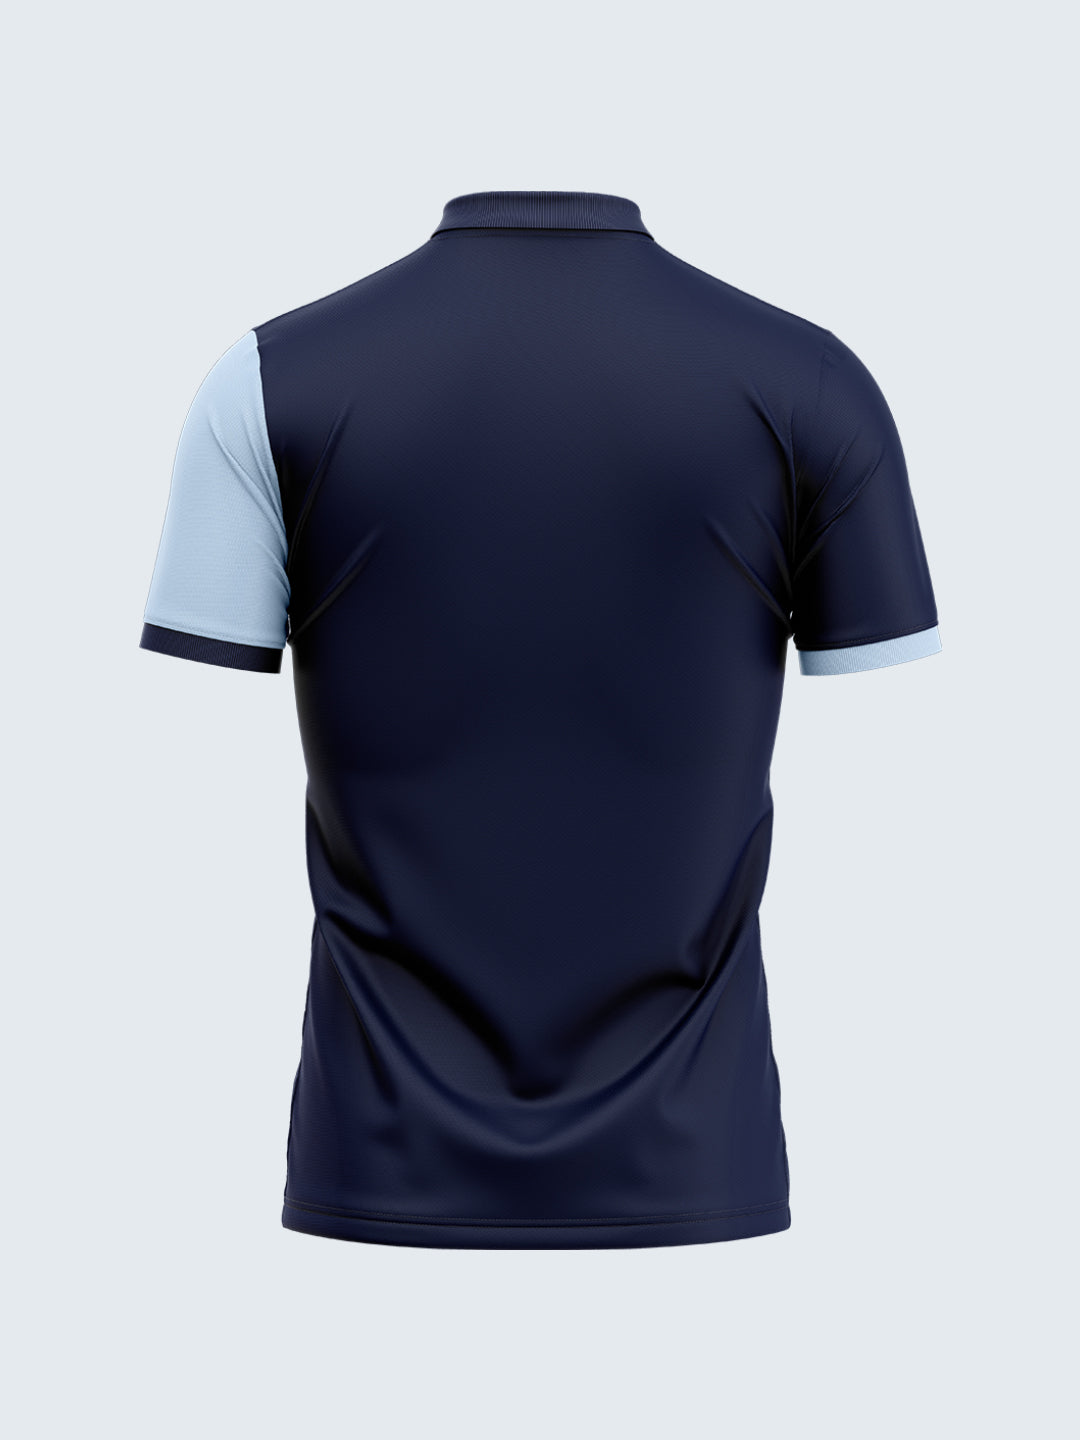 Customise Tennis Polo T-Shirt - 2135NB - Front